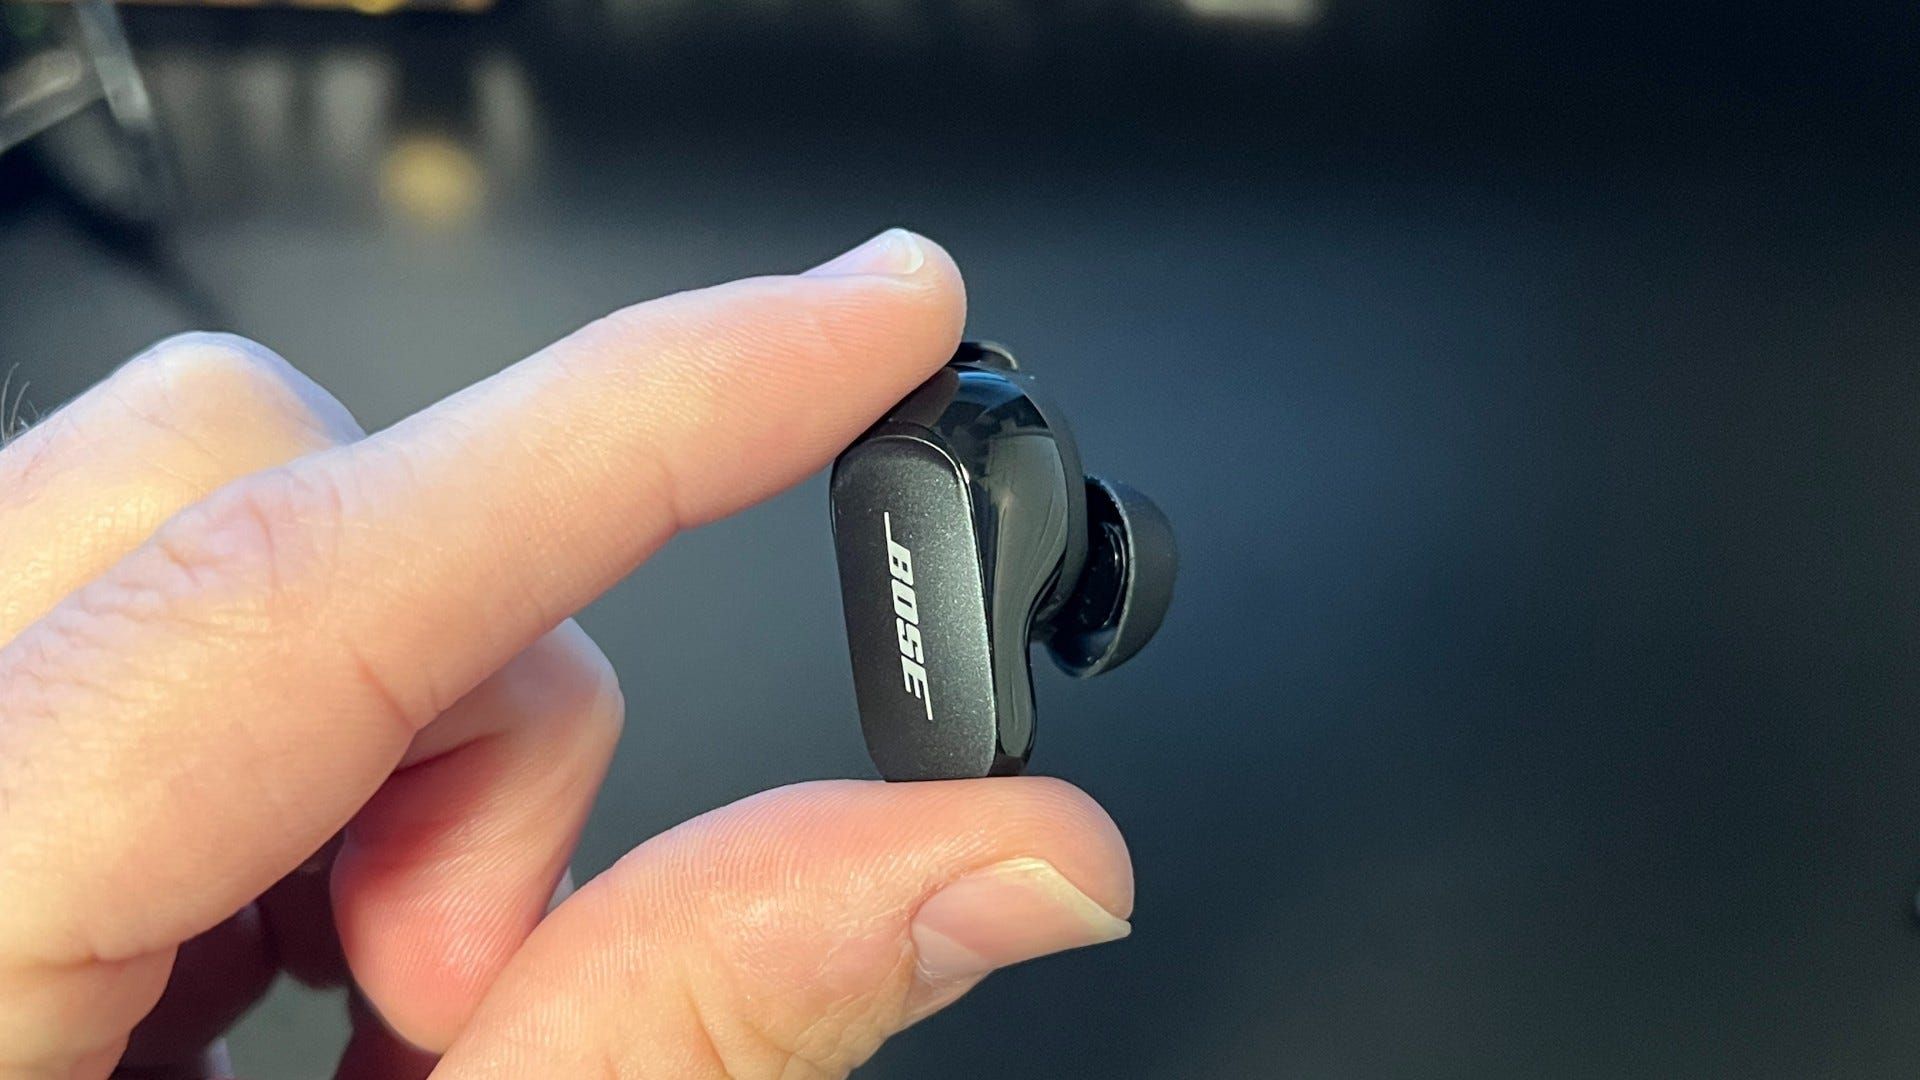 Bose Quiet Comfort 2 Earbud in between fingers with stem back showing